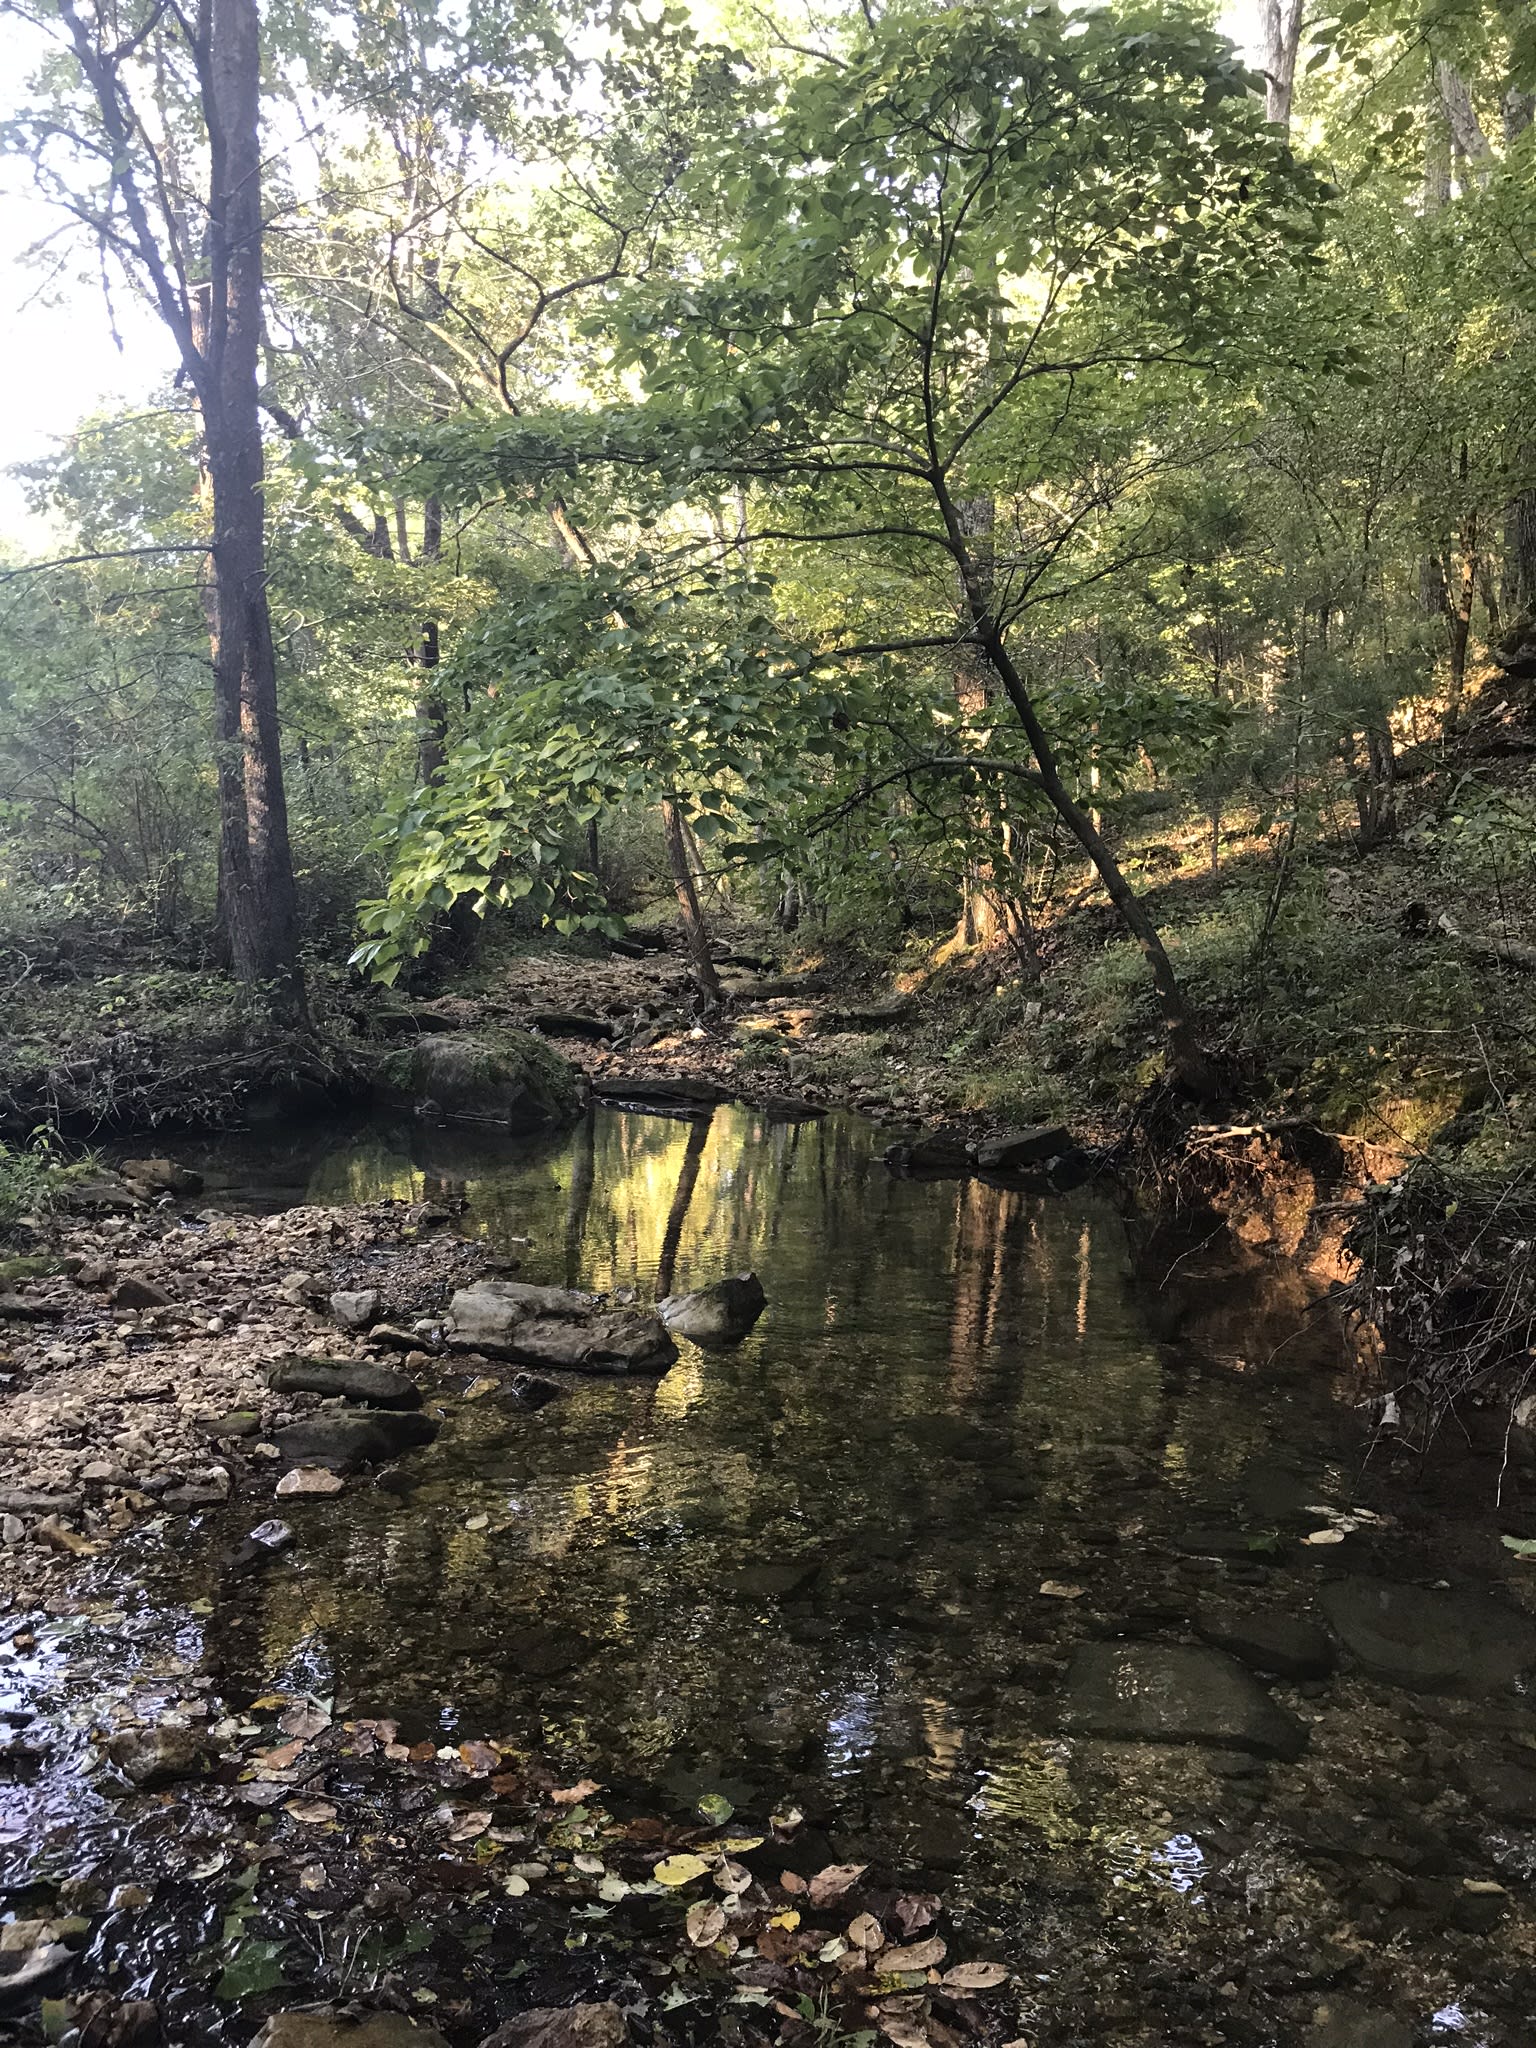 The spring fed creek